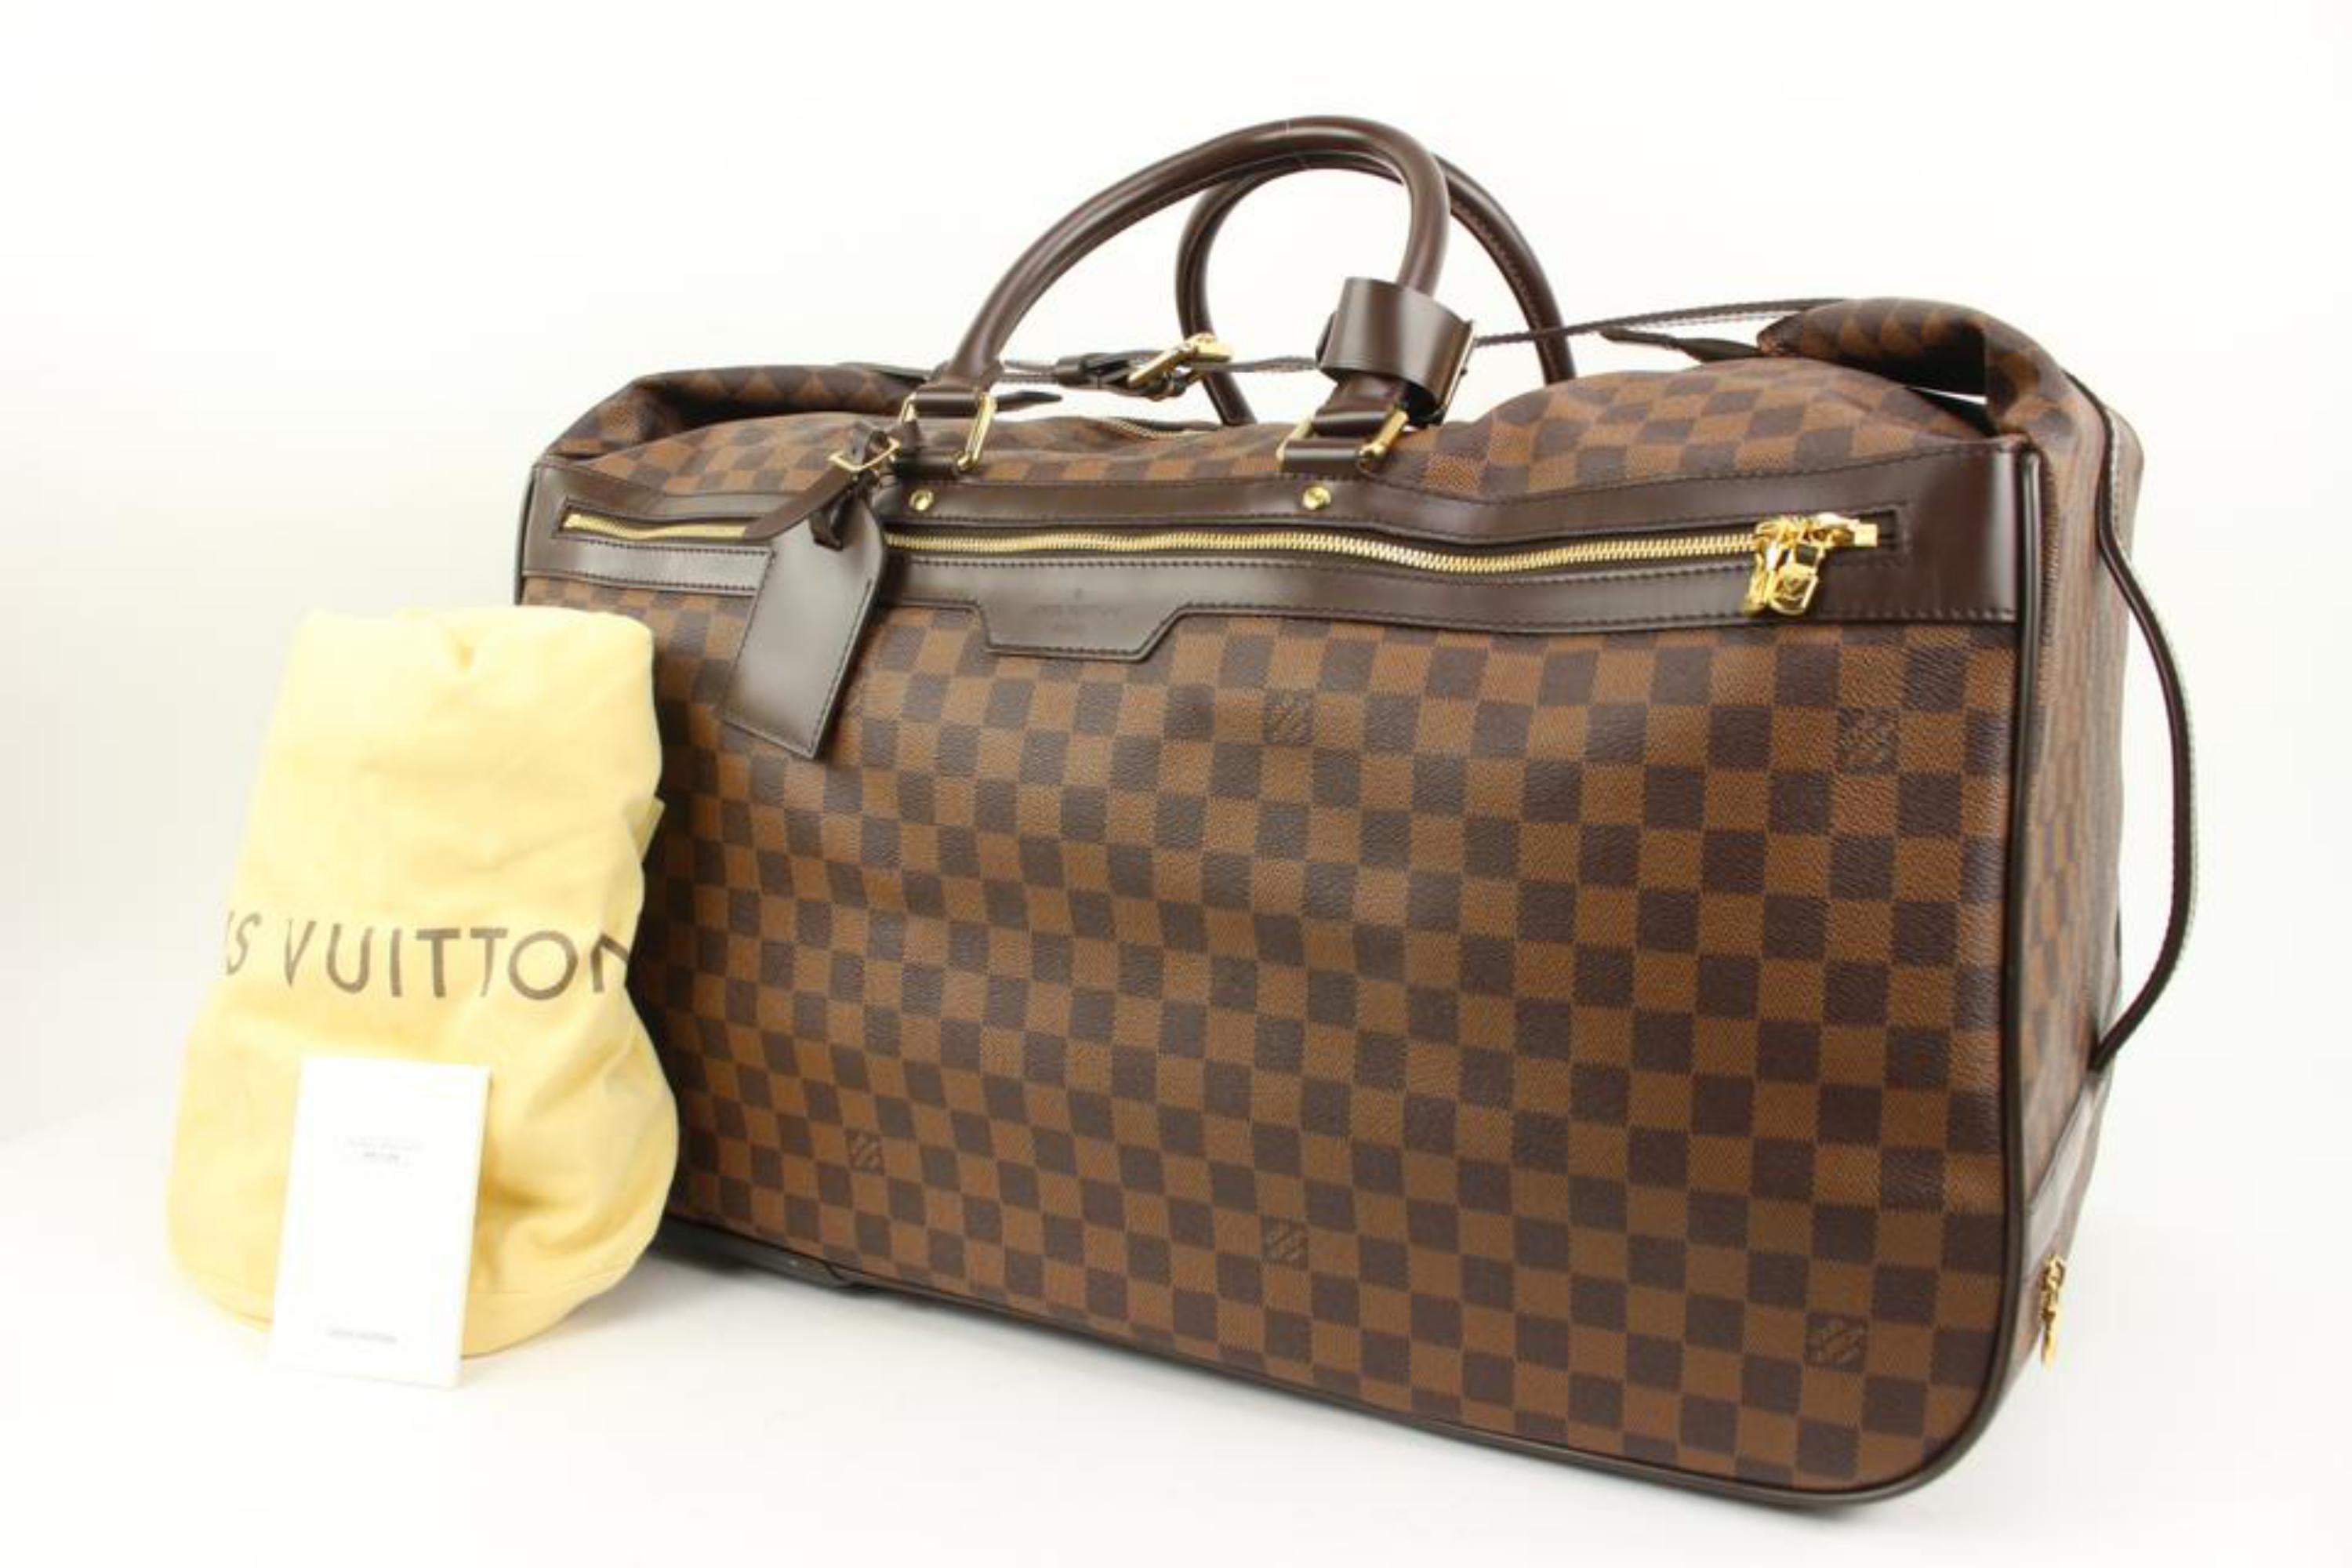 Louis Vuitton  Damier Ebene Eole 60 Convertible Rolling Luggage 23lk321s
Date Code/Serial Number: BA2009
Made In: France
Measurements: Length:  23